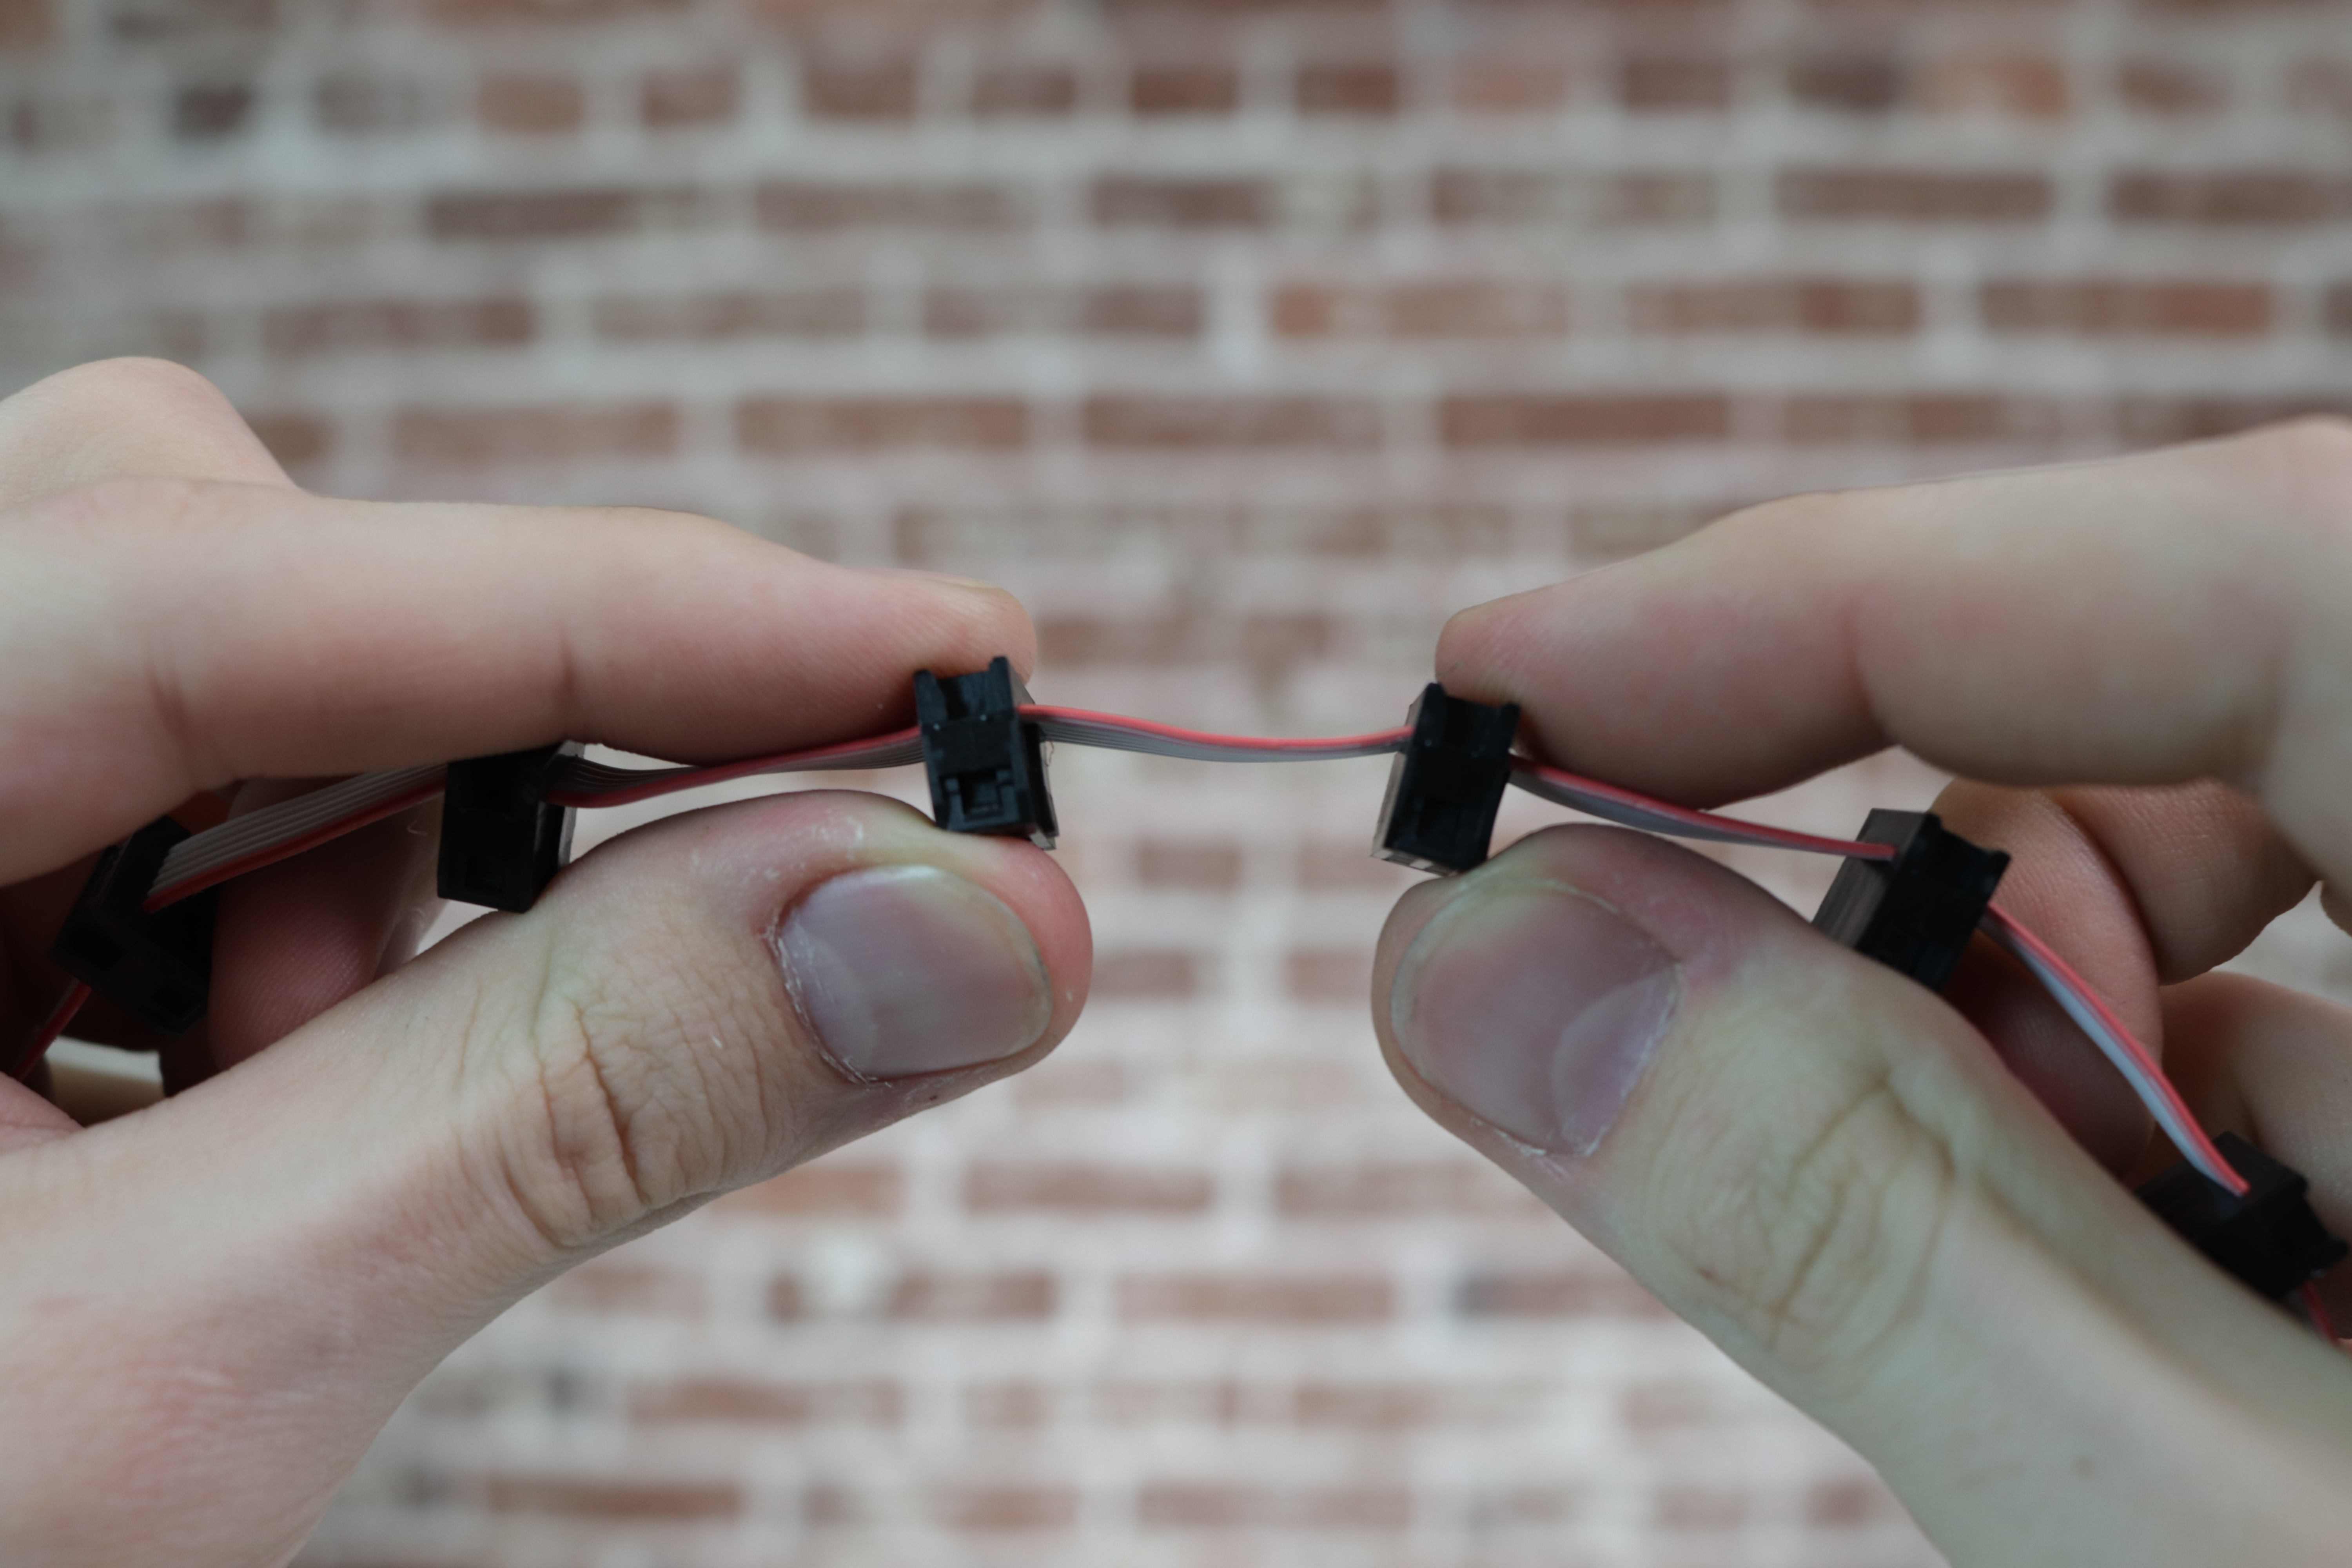 Holding the cable between two connectors